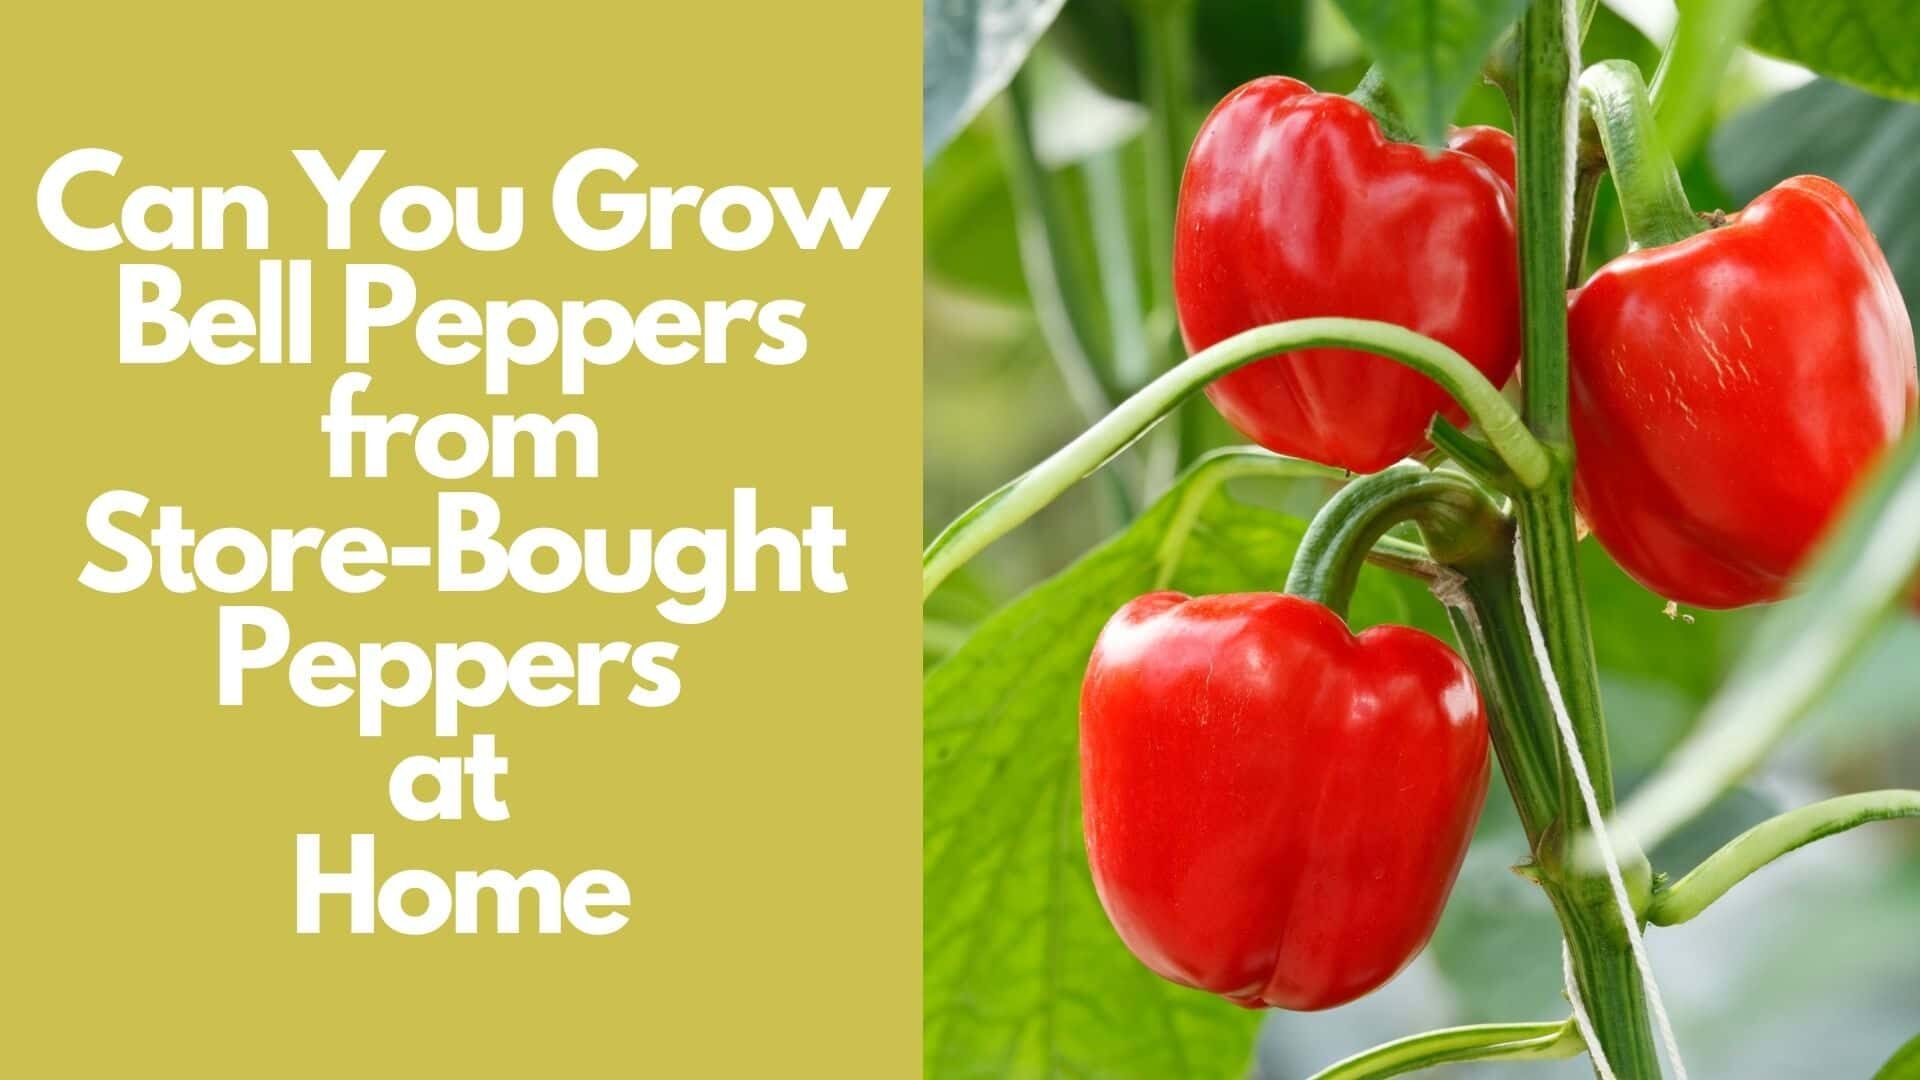 Can You Grow Bell Peppers from Store-Bought Peppers at Home